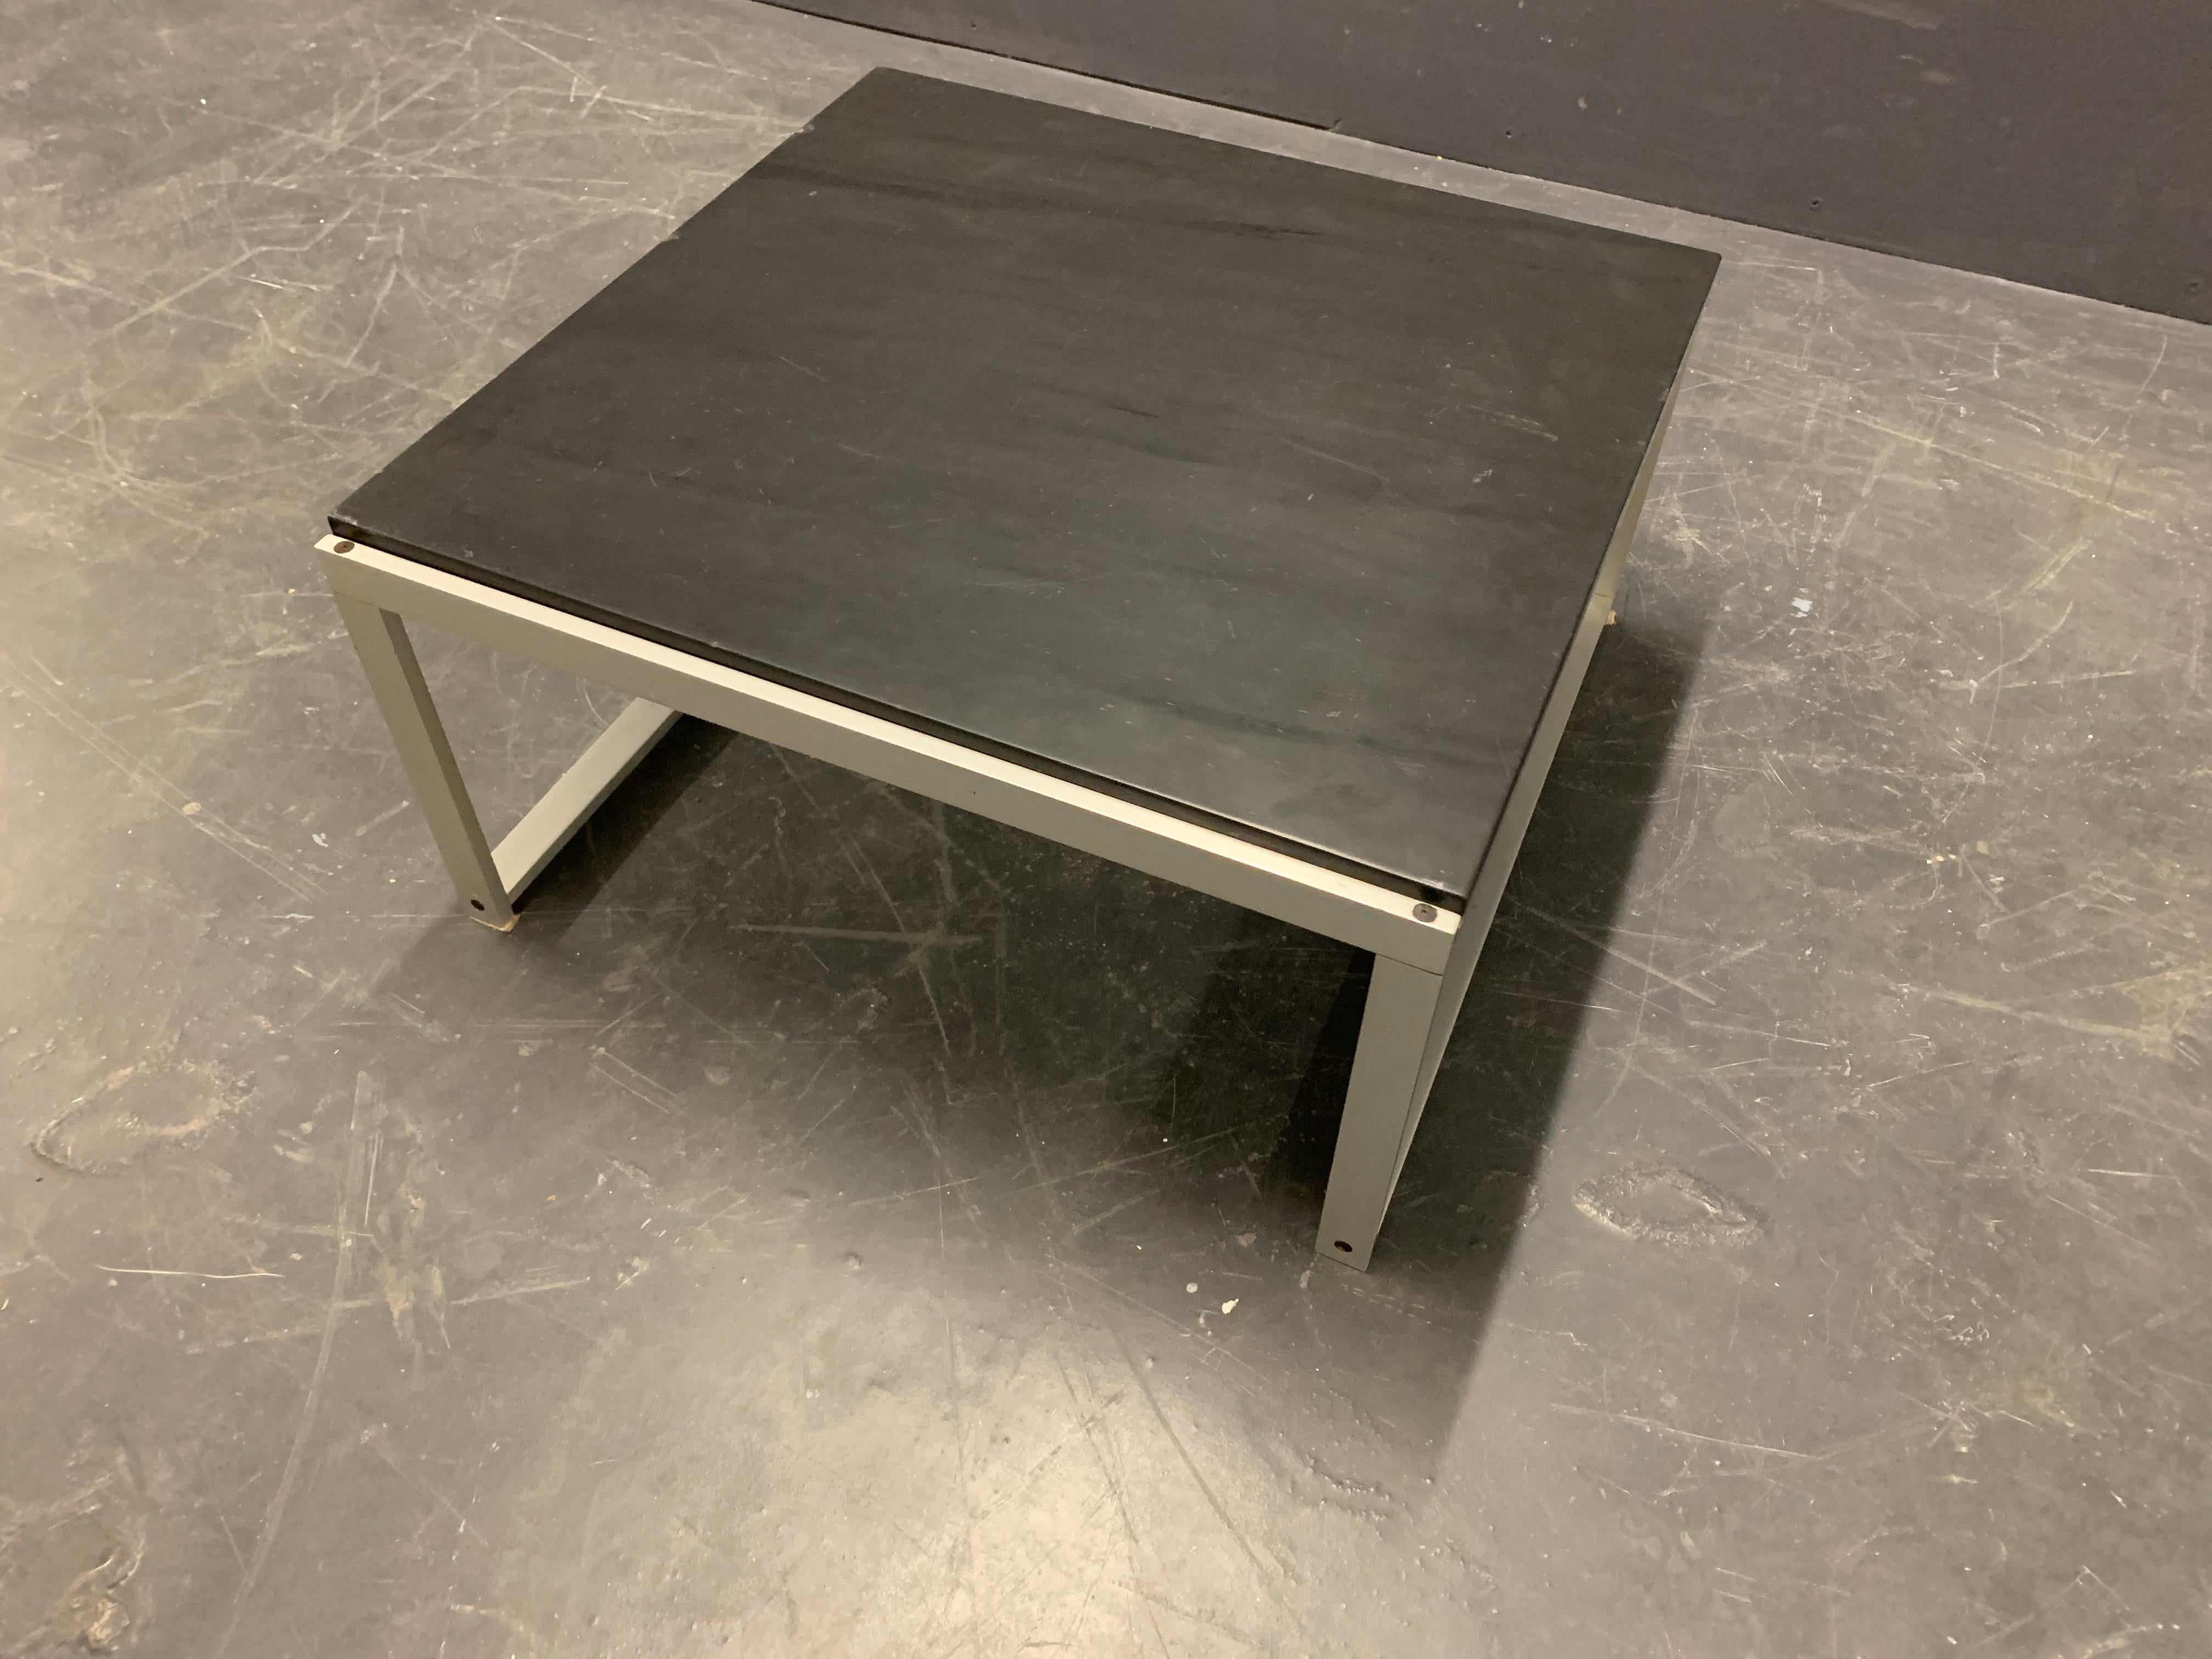 Amazing seating unit in aluminum and down filled leather with matching slate top table. Hoj workend together with Poul Kjaerholm and Bodil Kjaer.

All original with no repairs. 2 small chips on one side of the slate top - the other without.